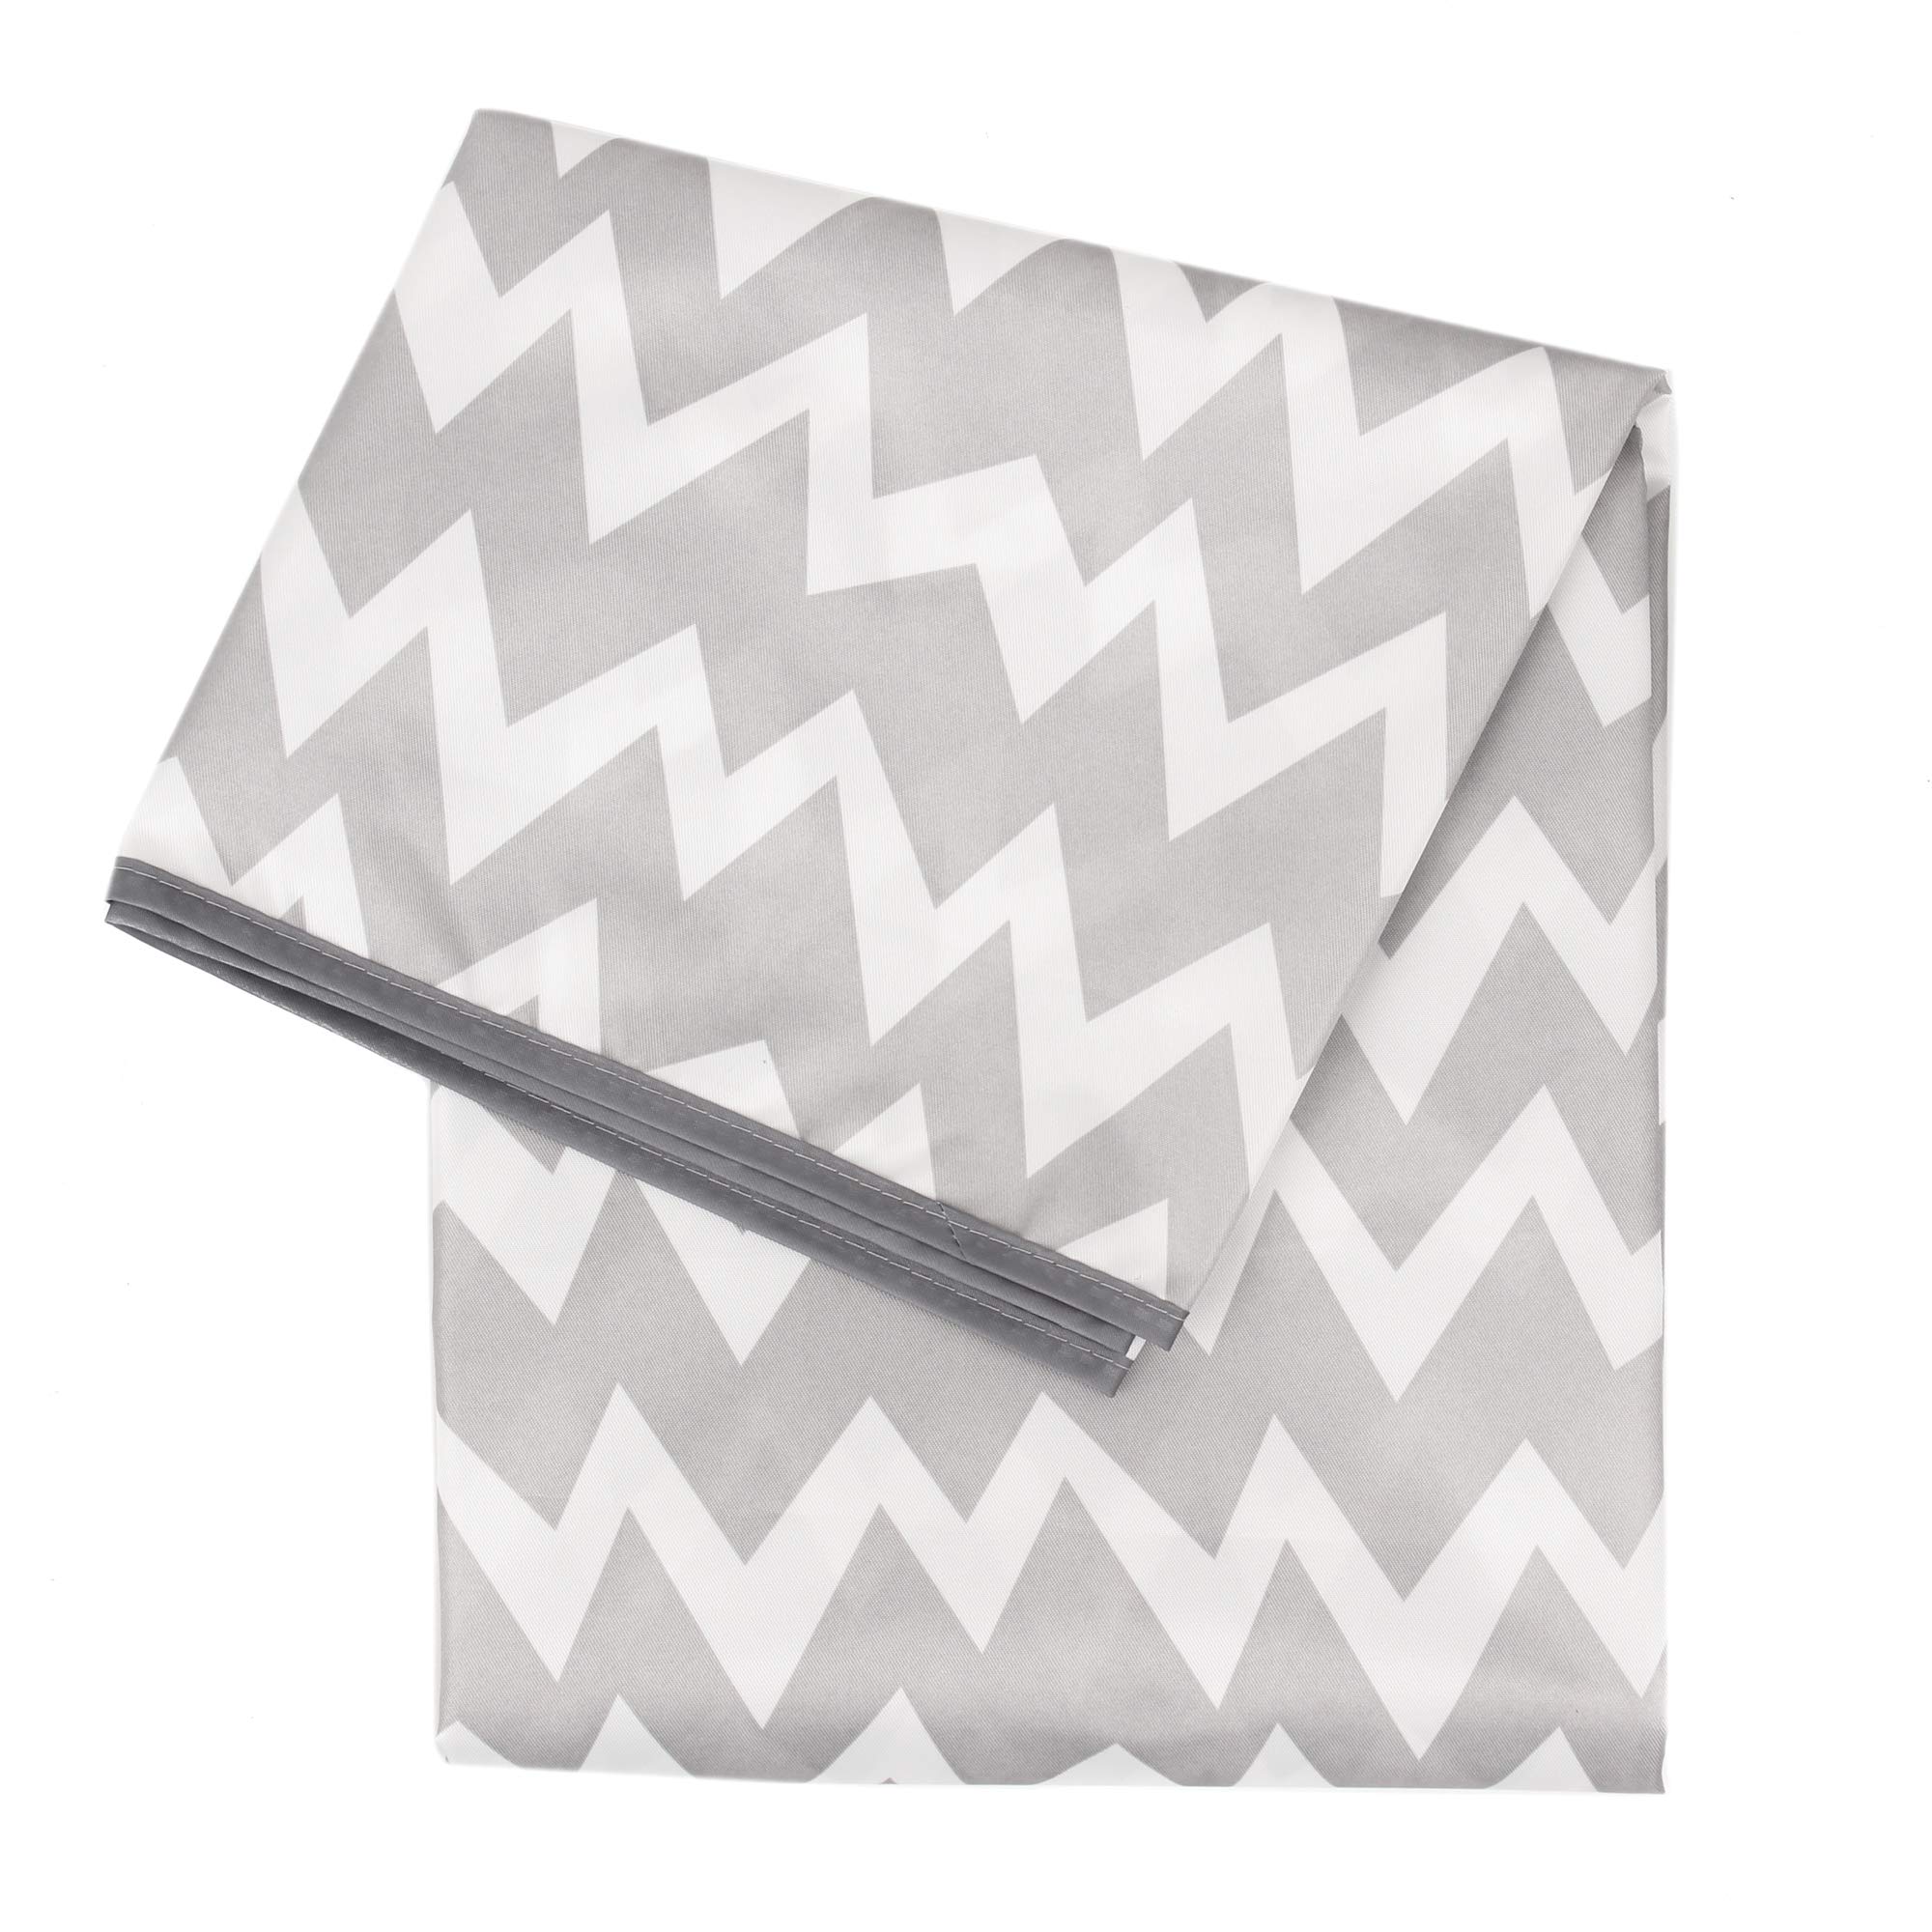 Book Cover Bumkins Baby Splat Mat for Under High Chair, Waterproof Washable Cloth for Arts and Crafts, Playtime Mats for Kids, Floors or Tables, Reusable Fabric 42x42 Square Gray Chevron